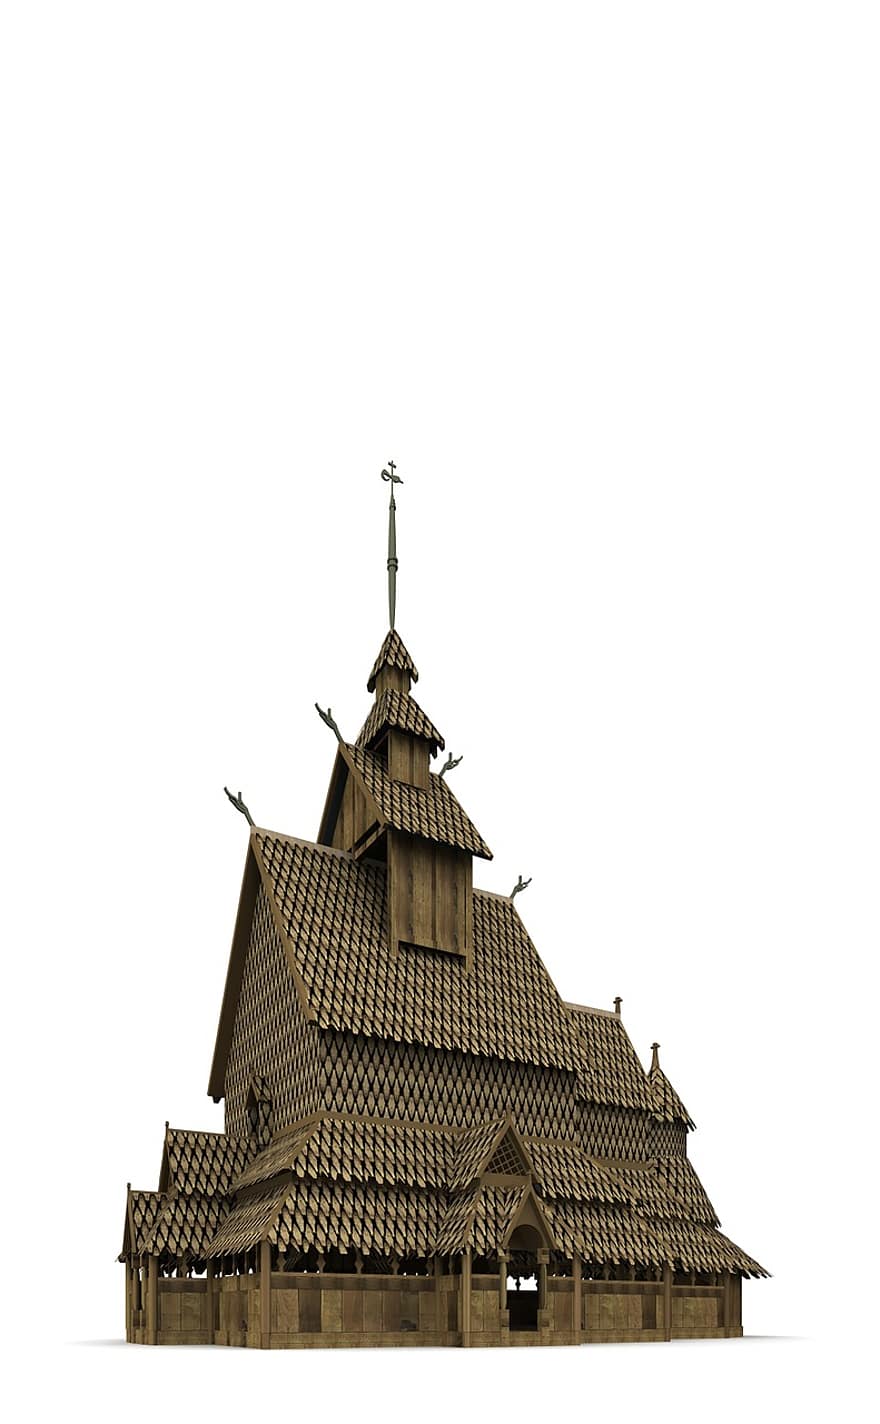 Stave Church, Norway, Architecture, Building, Church, Places Of Interest, Historically, Tourists, Attraction, Landmark, Facade